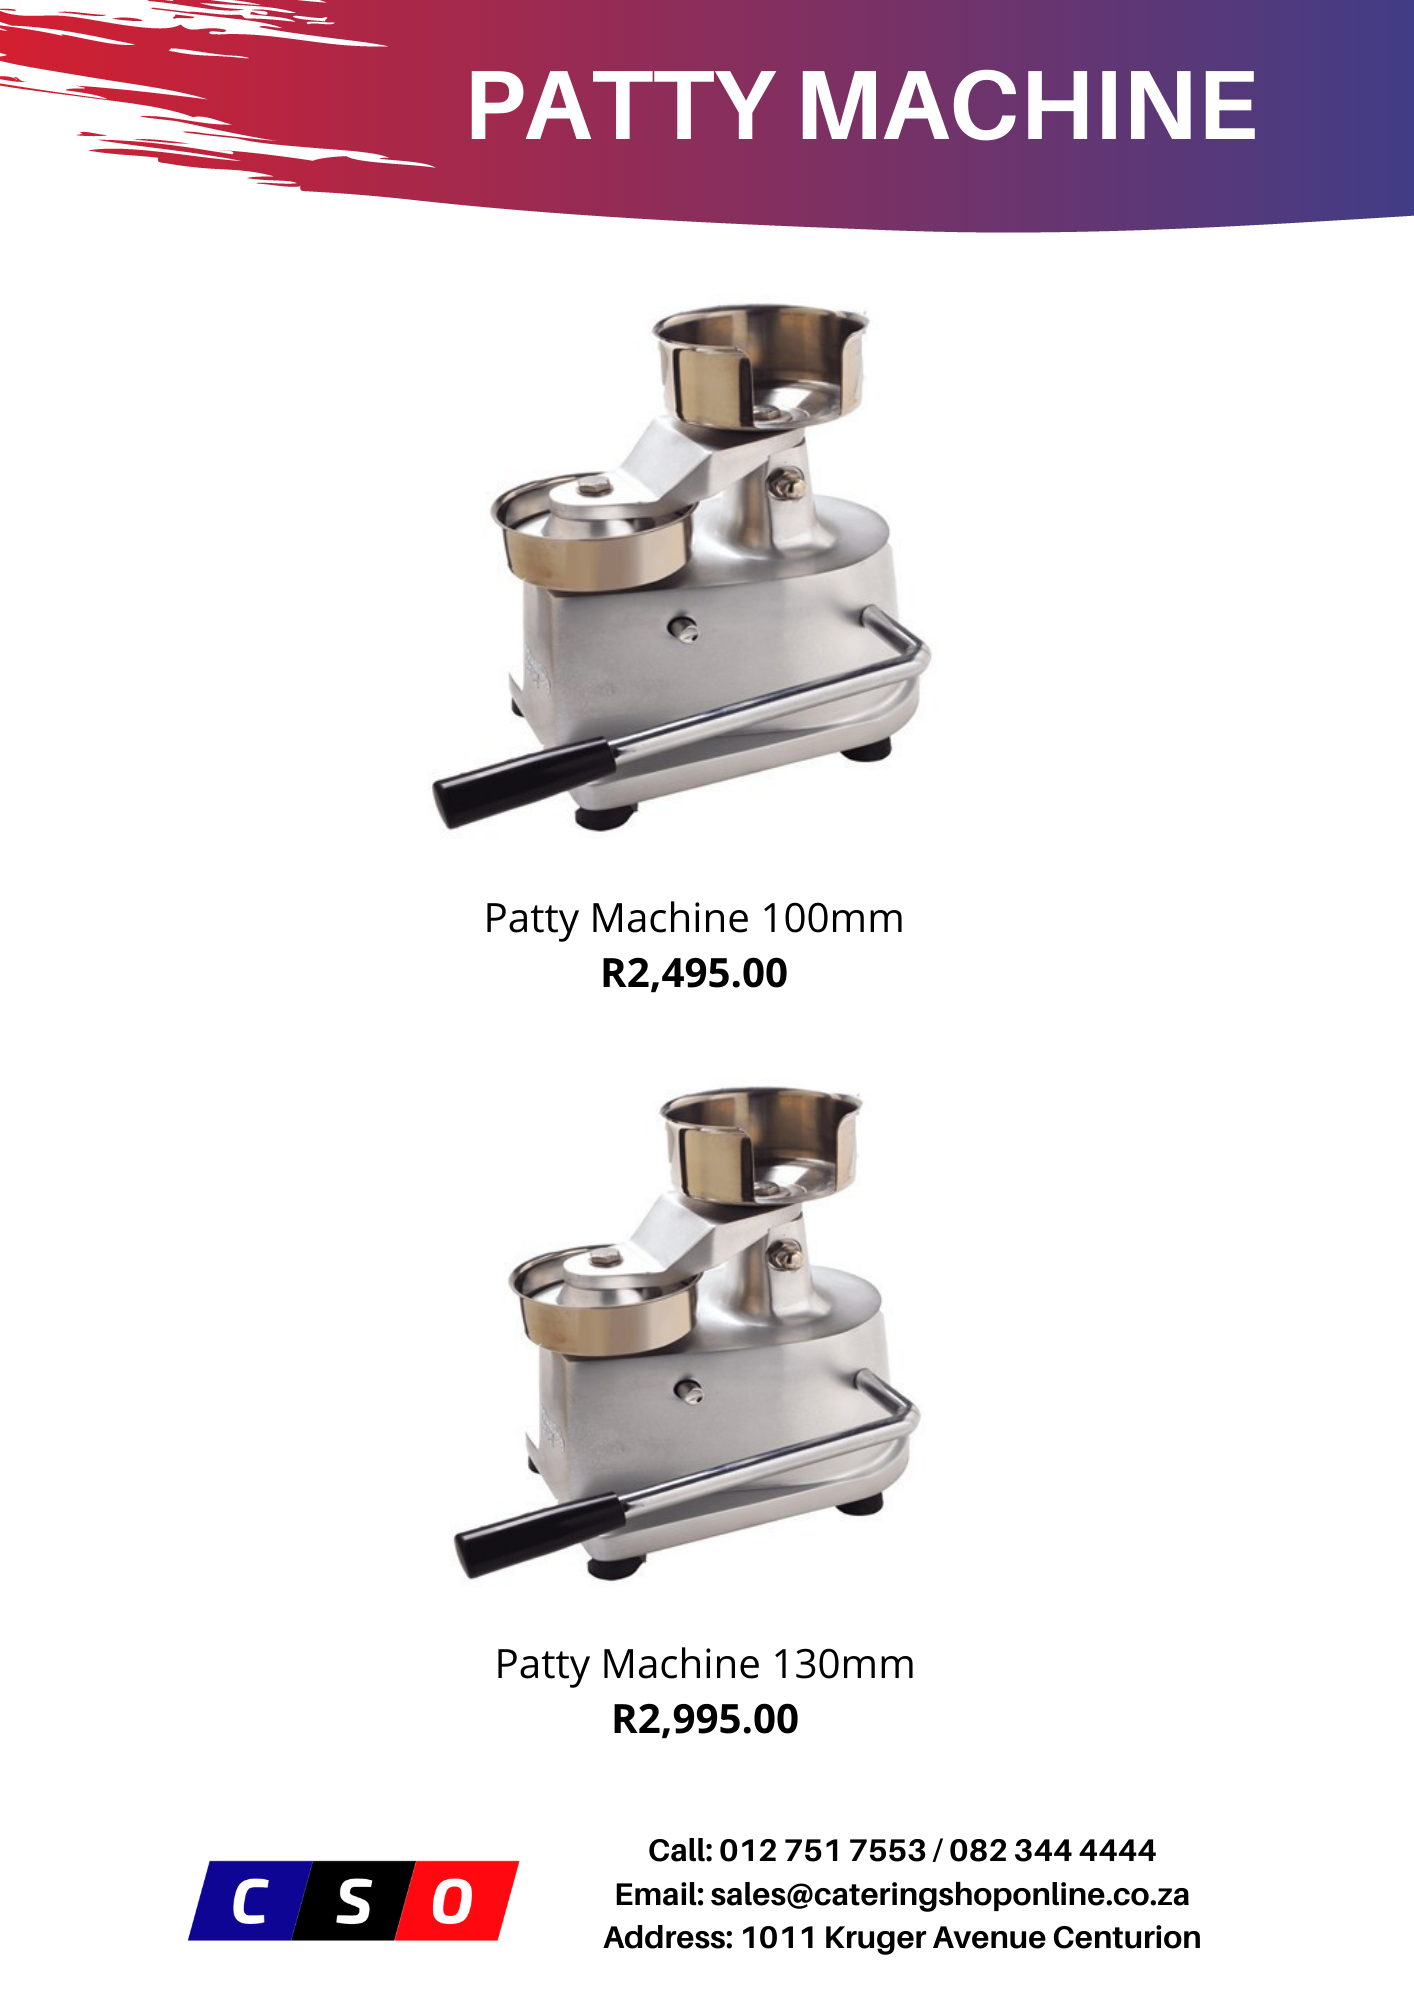 Patty Machines for sale